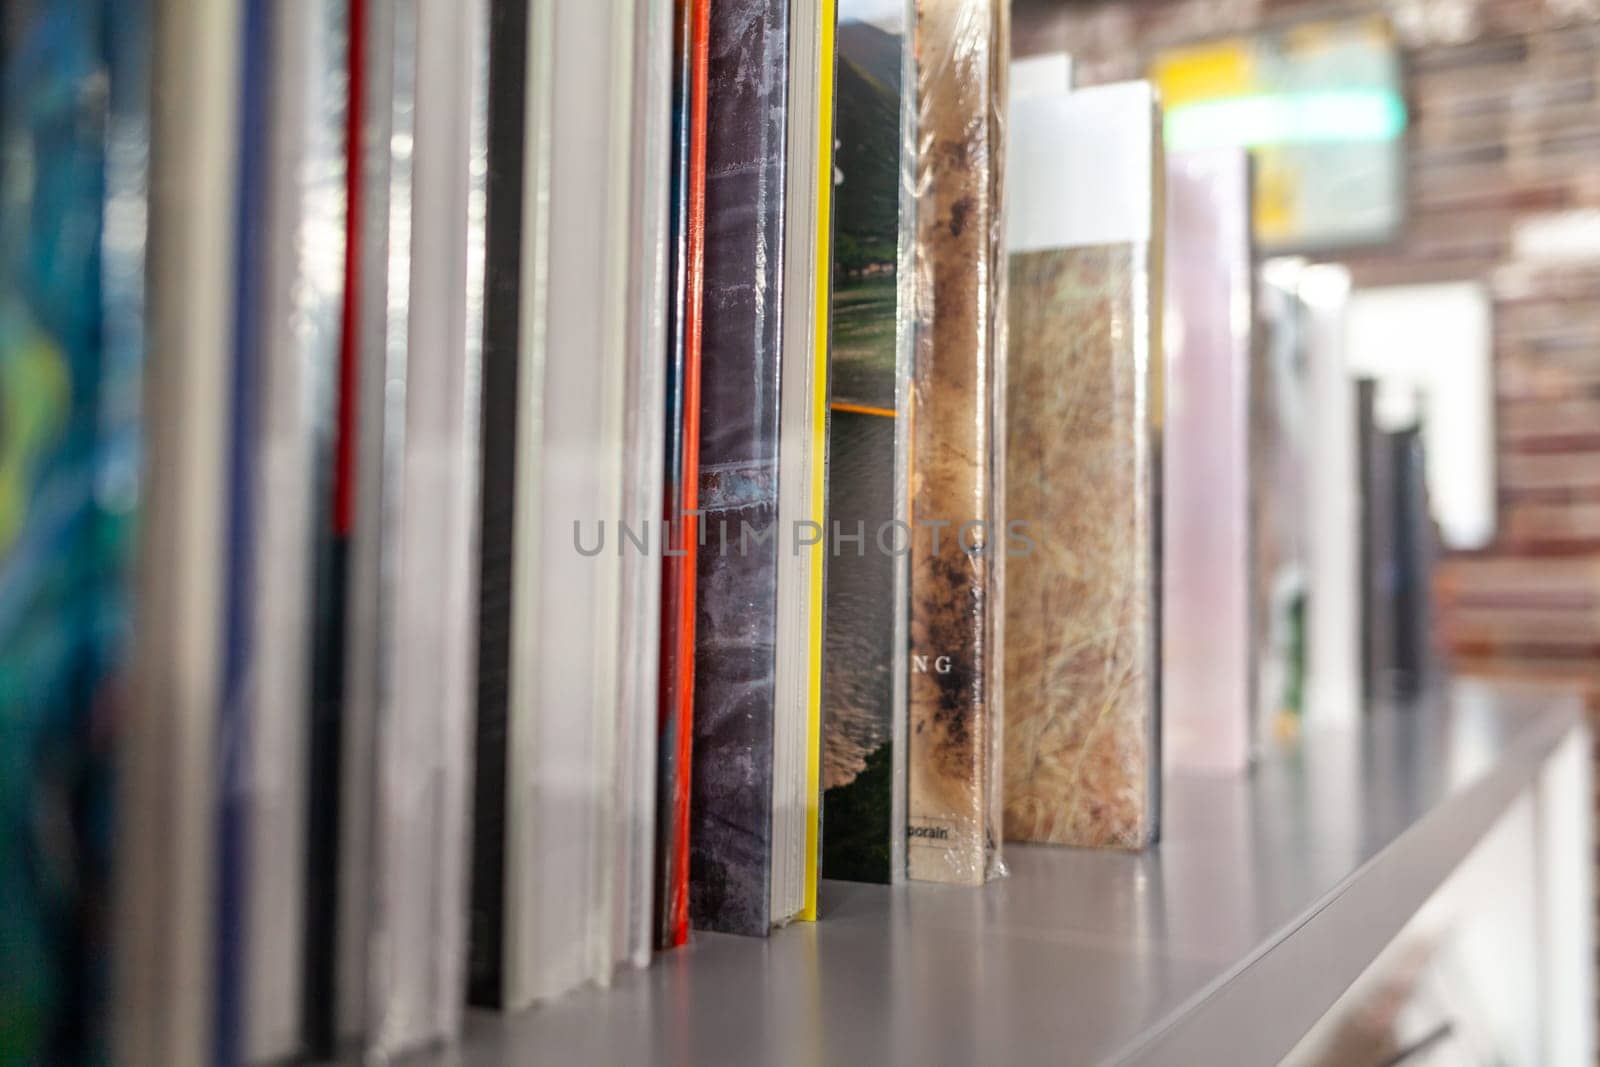 Different editions of books are on the shelf and ready for sale by AnatoliiFoto